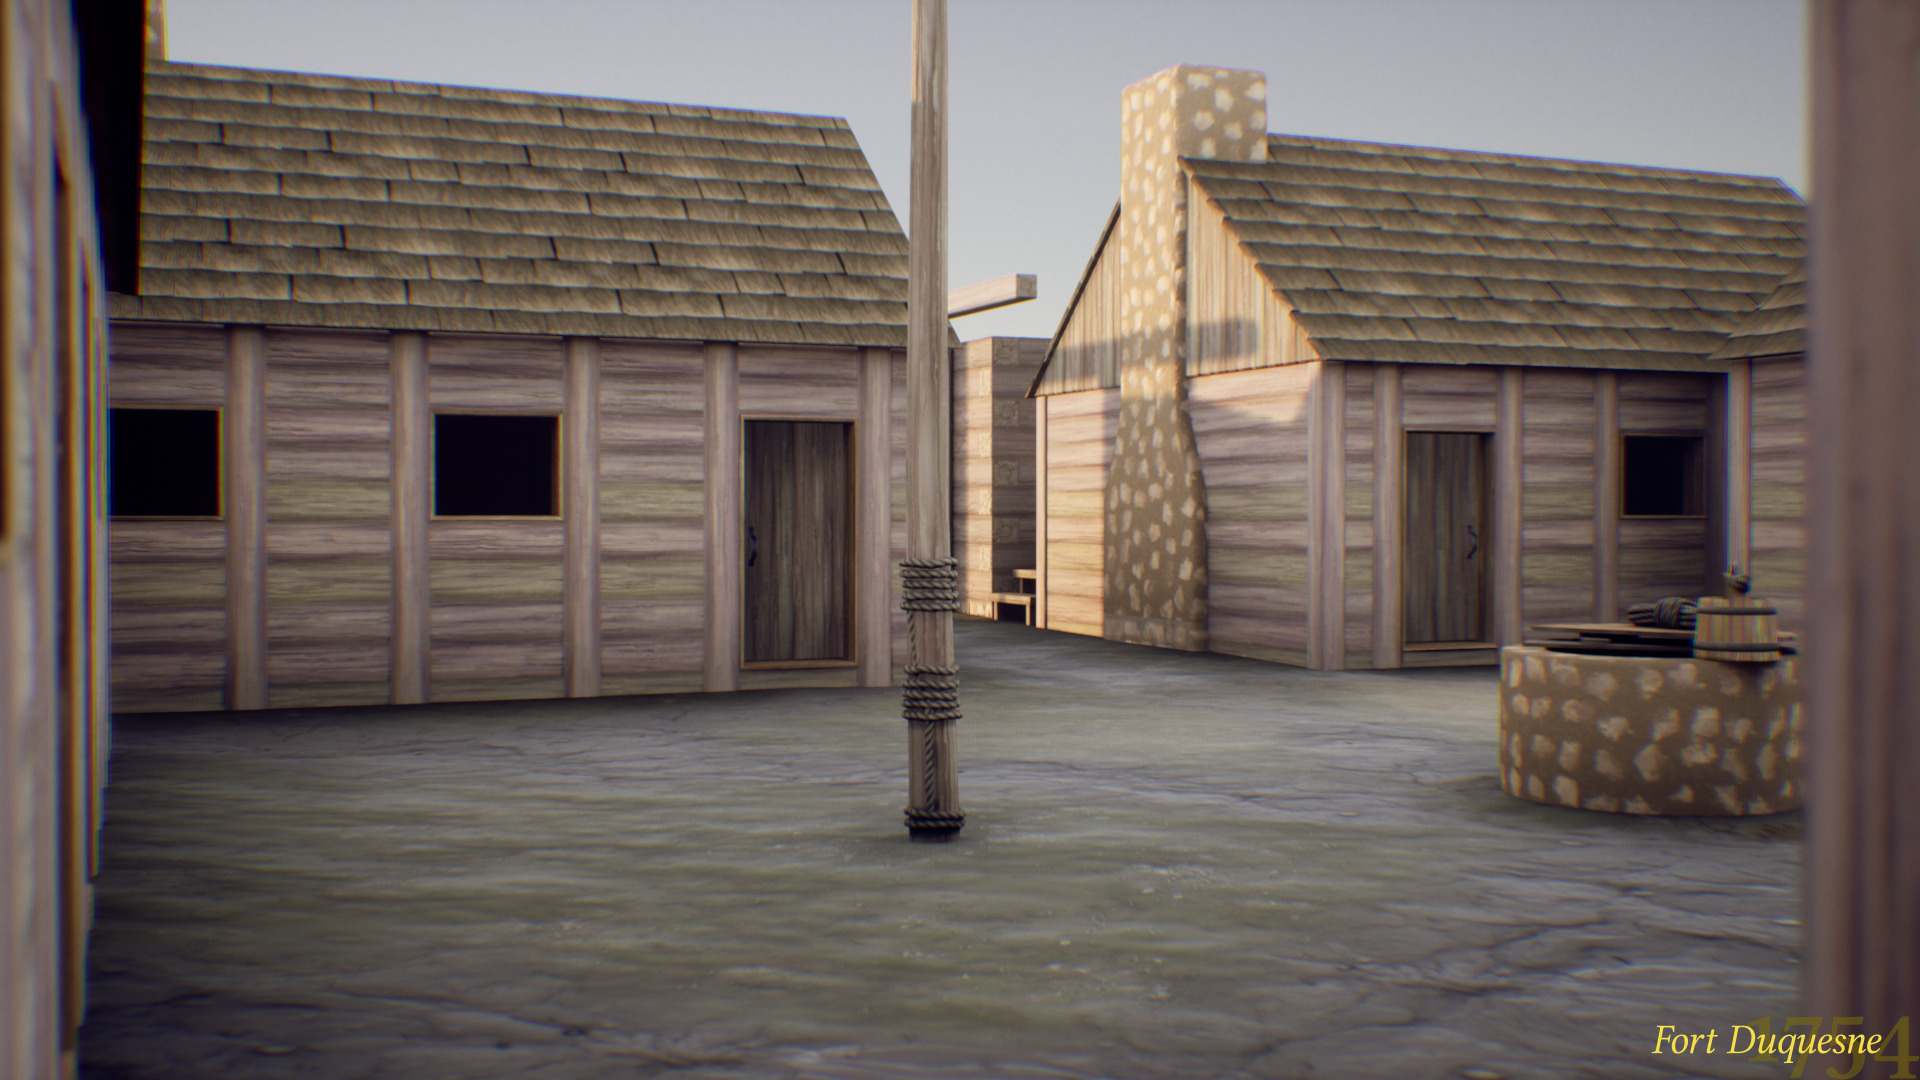 A 3D model of the interior courtyard (parade ground) of Fort Duquesne, a star-shaped wooden fort. Wooden buildings encircle the courtyard, with a clear view towards the fort's main gate in the distance. A central well sits in the right foreground.